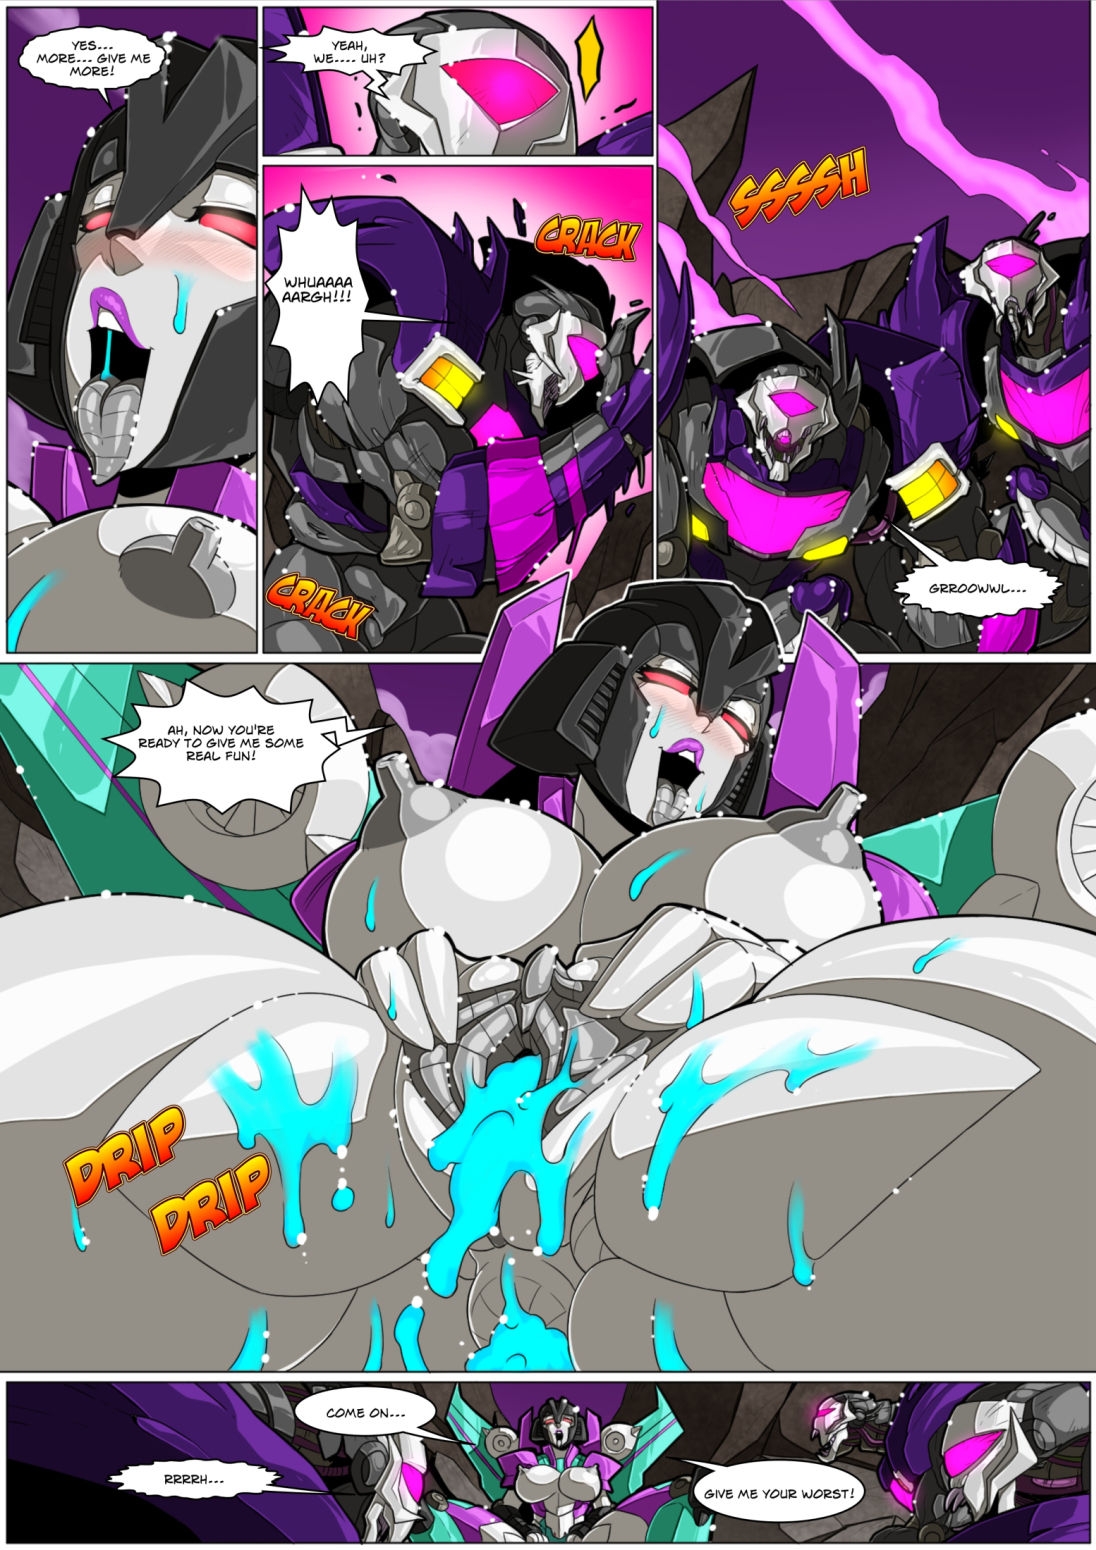 [MAD-Project] The Null Zone -Parallel- (Transformers) 7